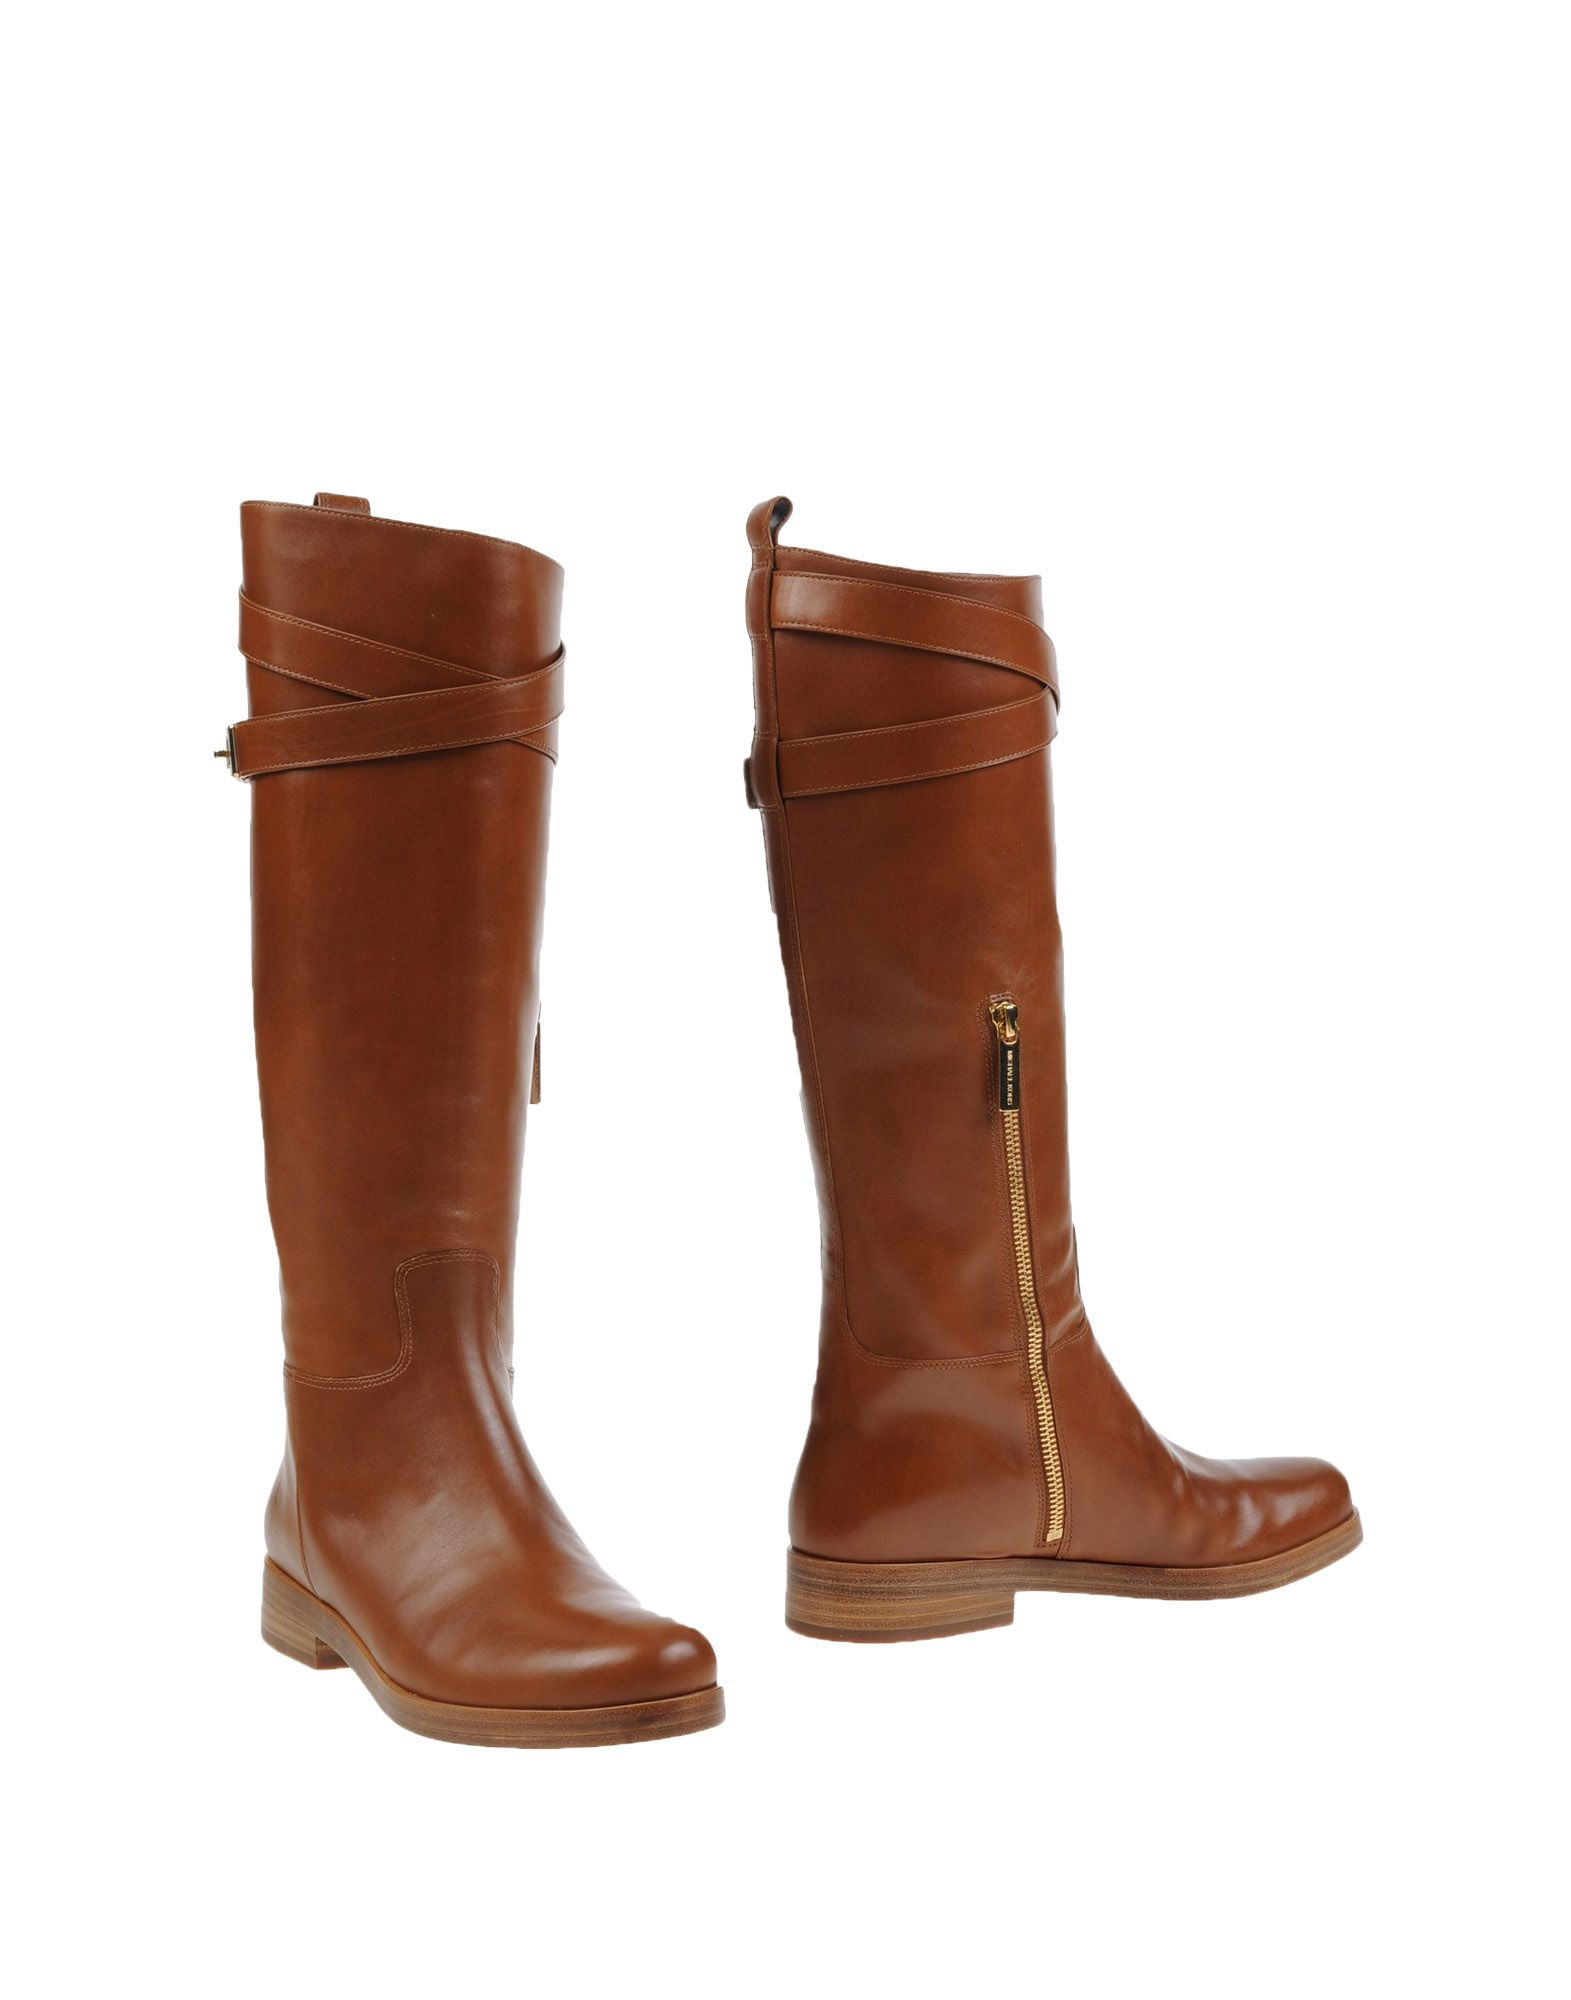 Lyst - Michael Kors Boots in Brown